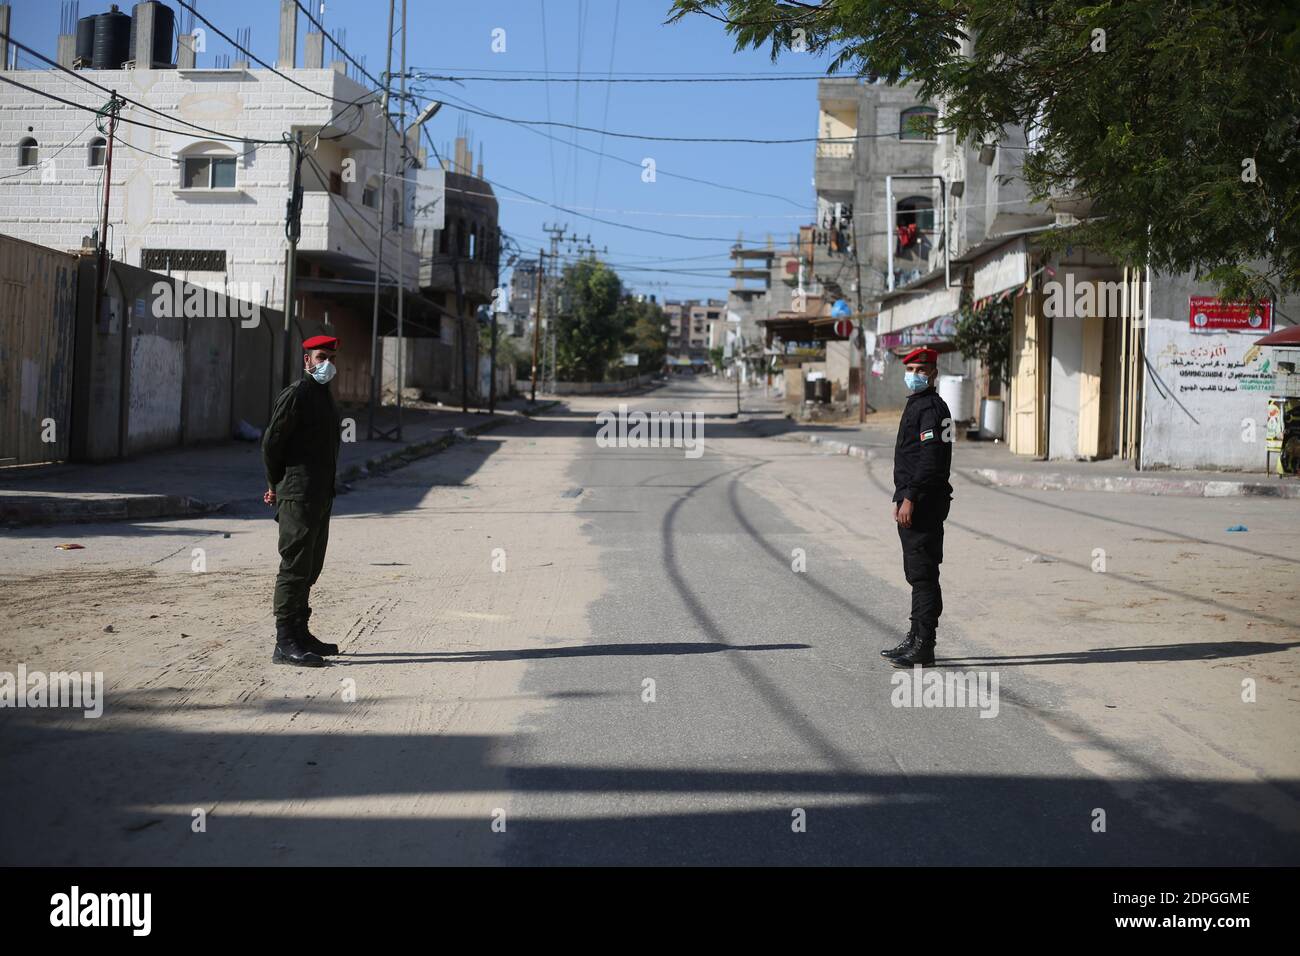 Gaza. 19th Dec, 2020. Palestinian policemen stand guard in the Gaza Strip city of Rafah amid a lockdown, on Dec. 19, 2020. A full lockdown and curfew have been imposed in the West Bank and the Gaza Strip to curb the growing numbers of COVID-19 infections and deaths. Credit: Khaled Omar/Xinhua/Alamy Live News Stock Photo